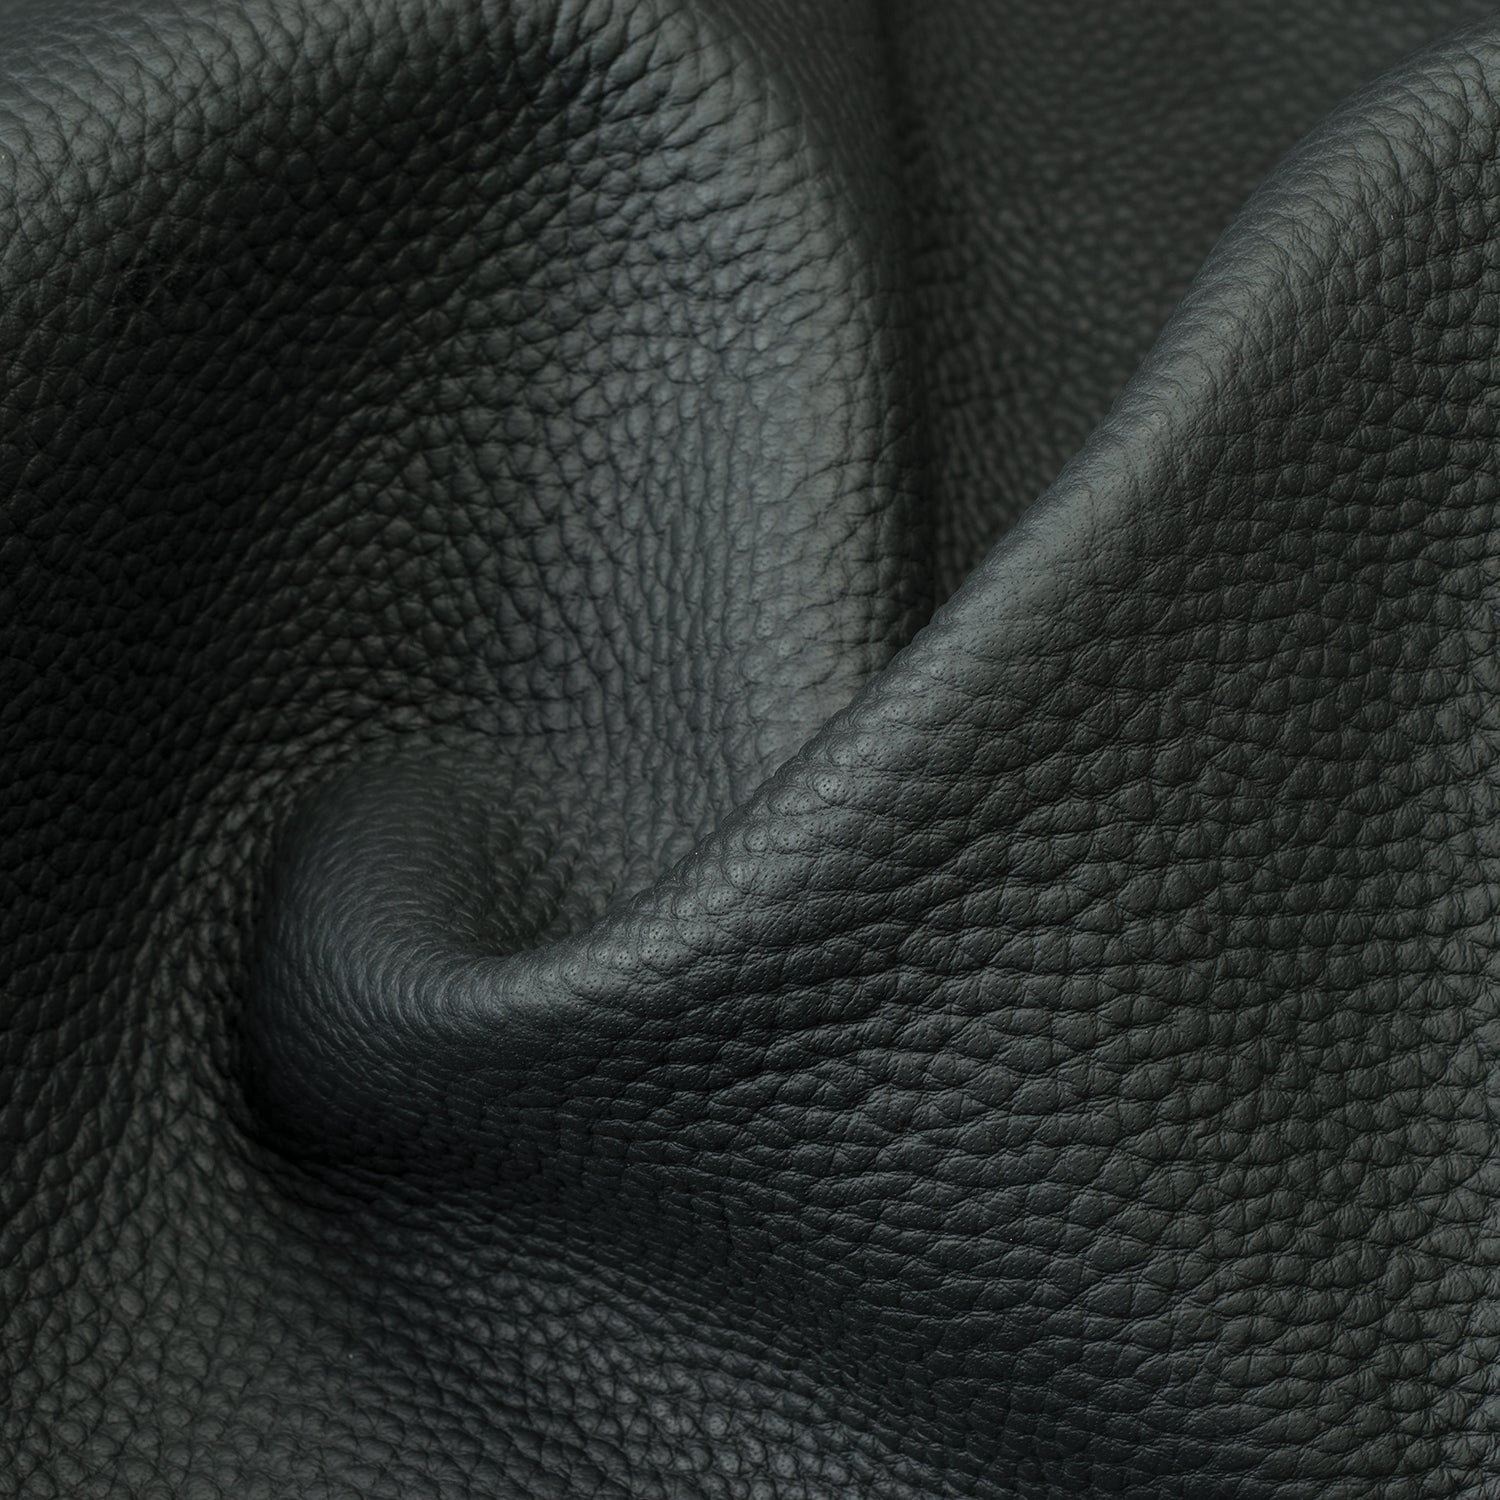 Texture Of Genuine Matte Rough Leather Closeup Embossed Under The